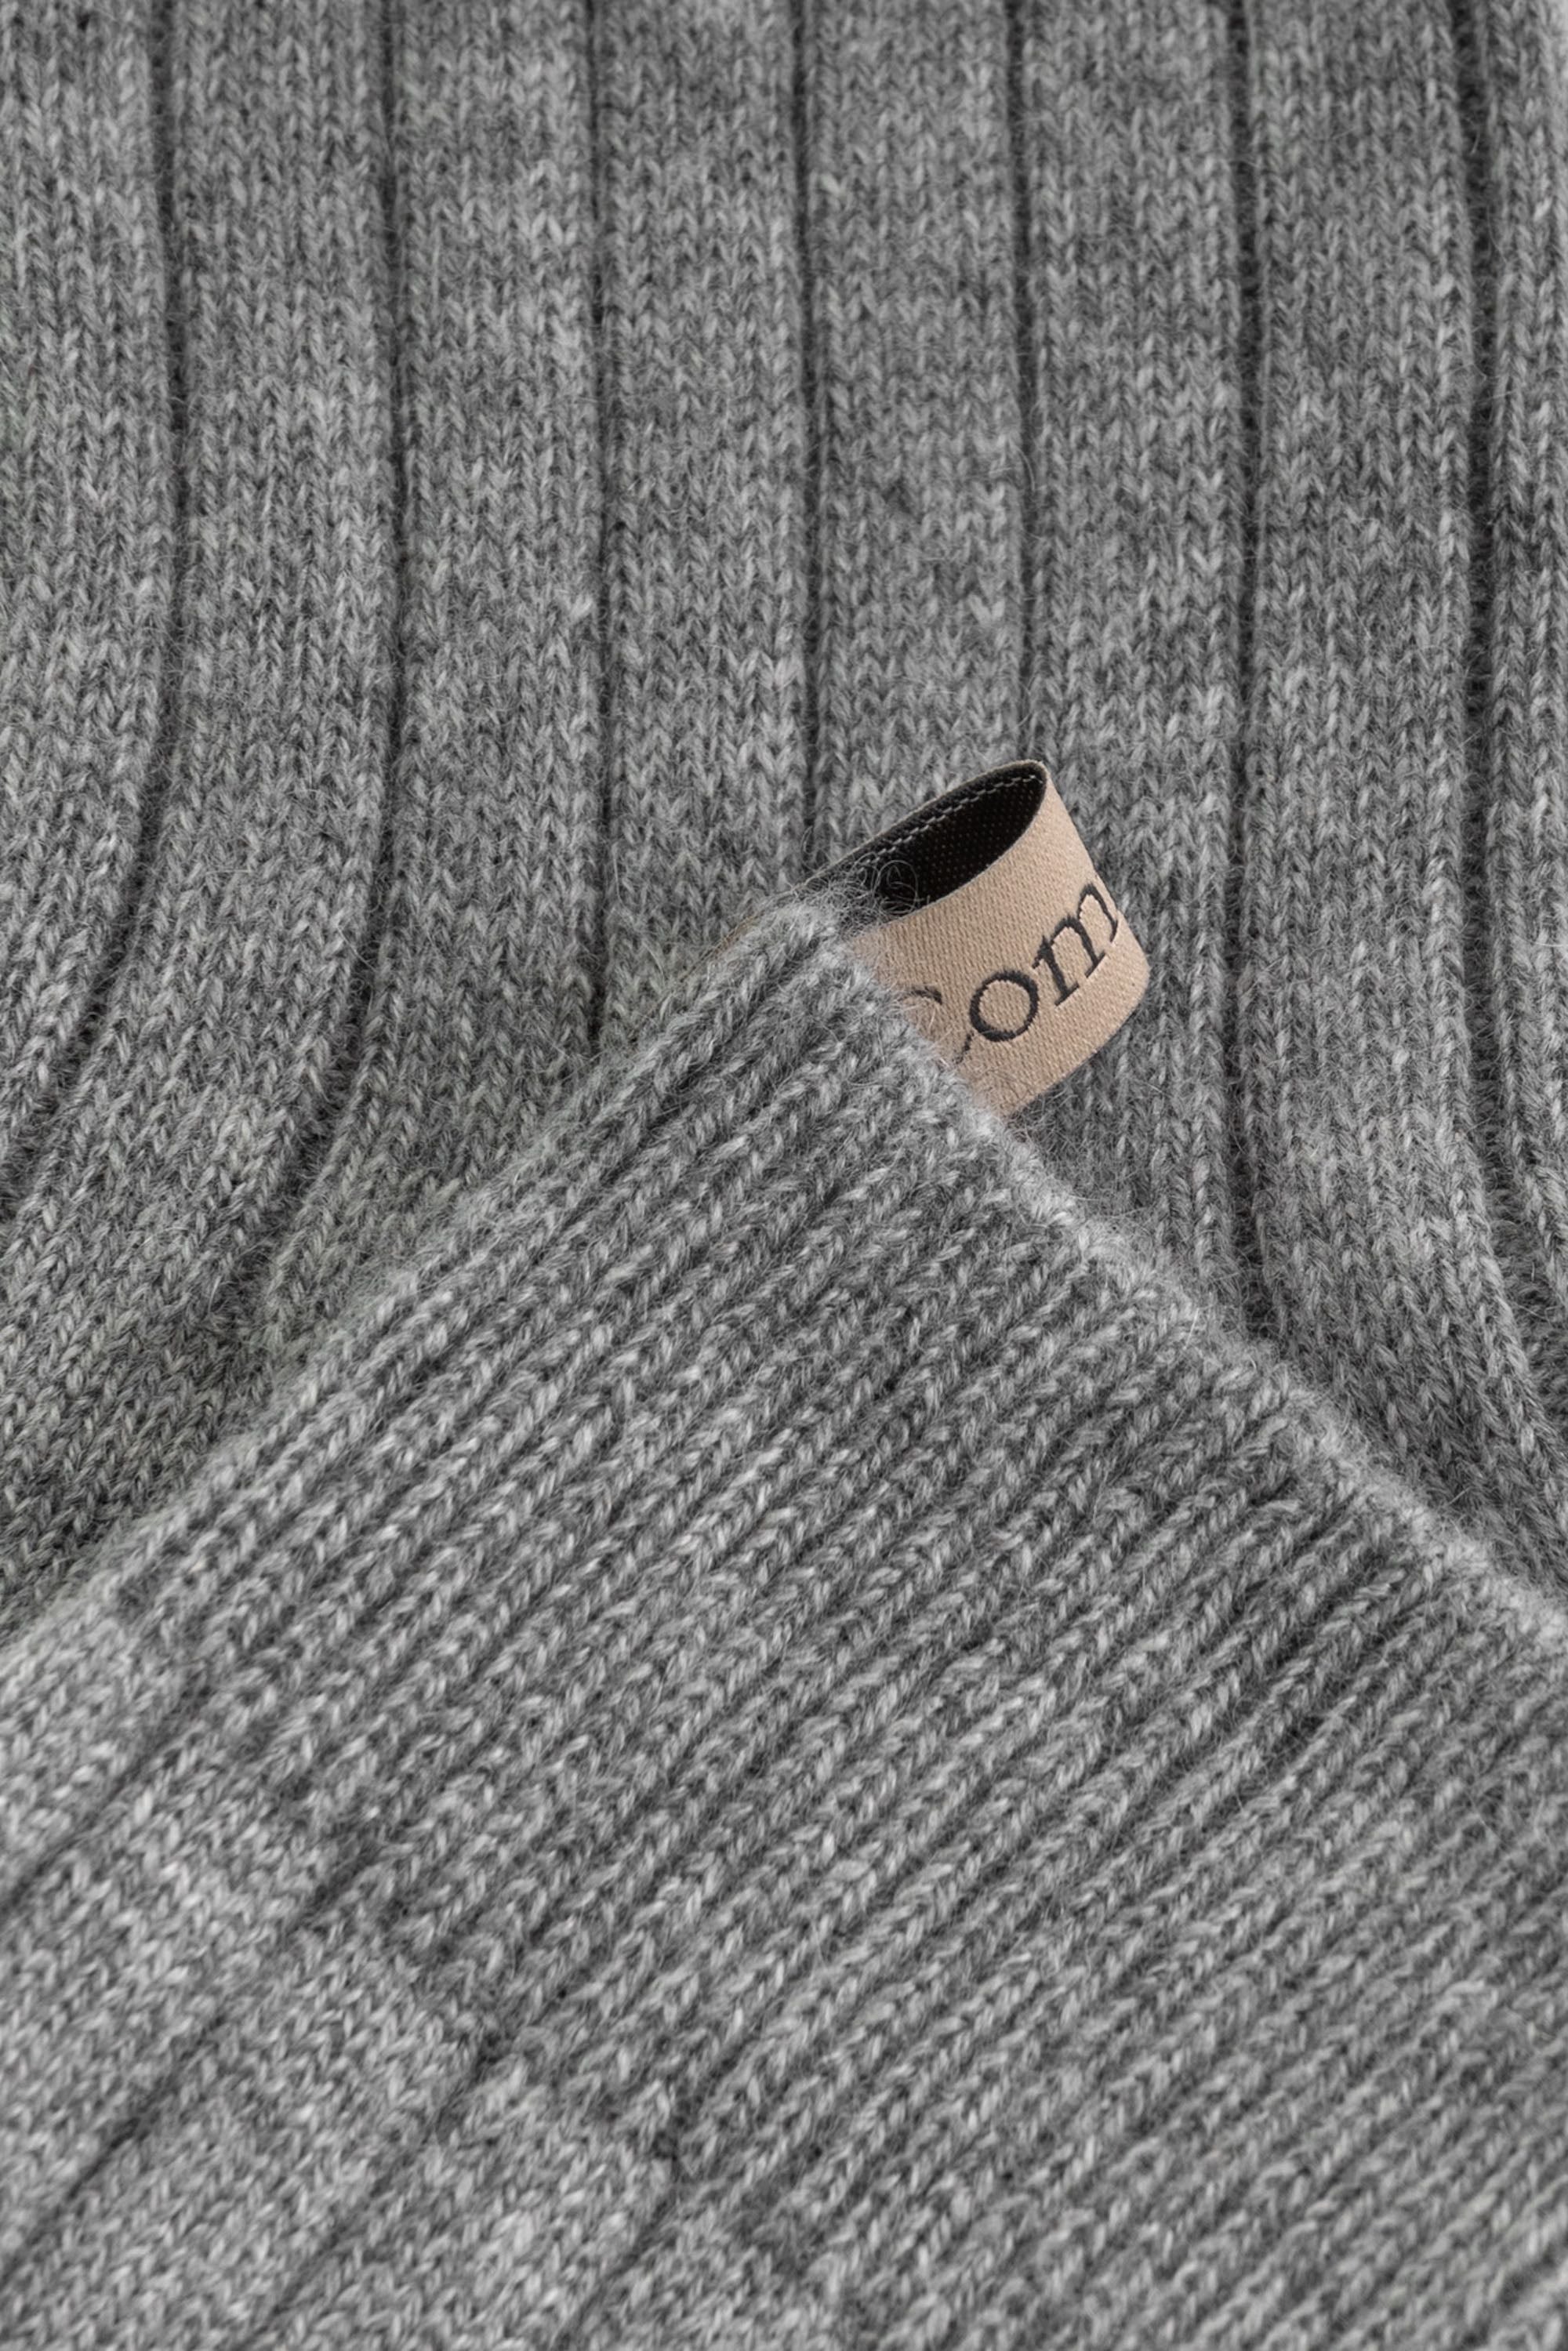 Ribbon tag detail, The Danielle Sock in Heather Grey, Mongolian Cashmere